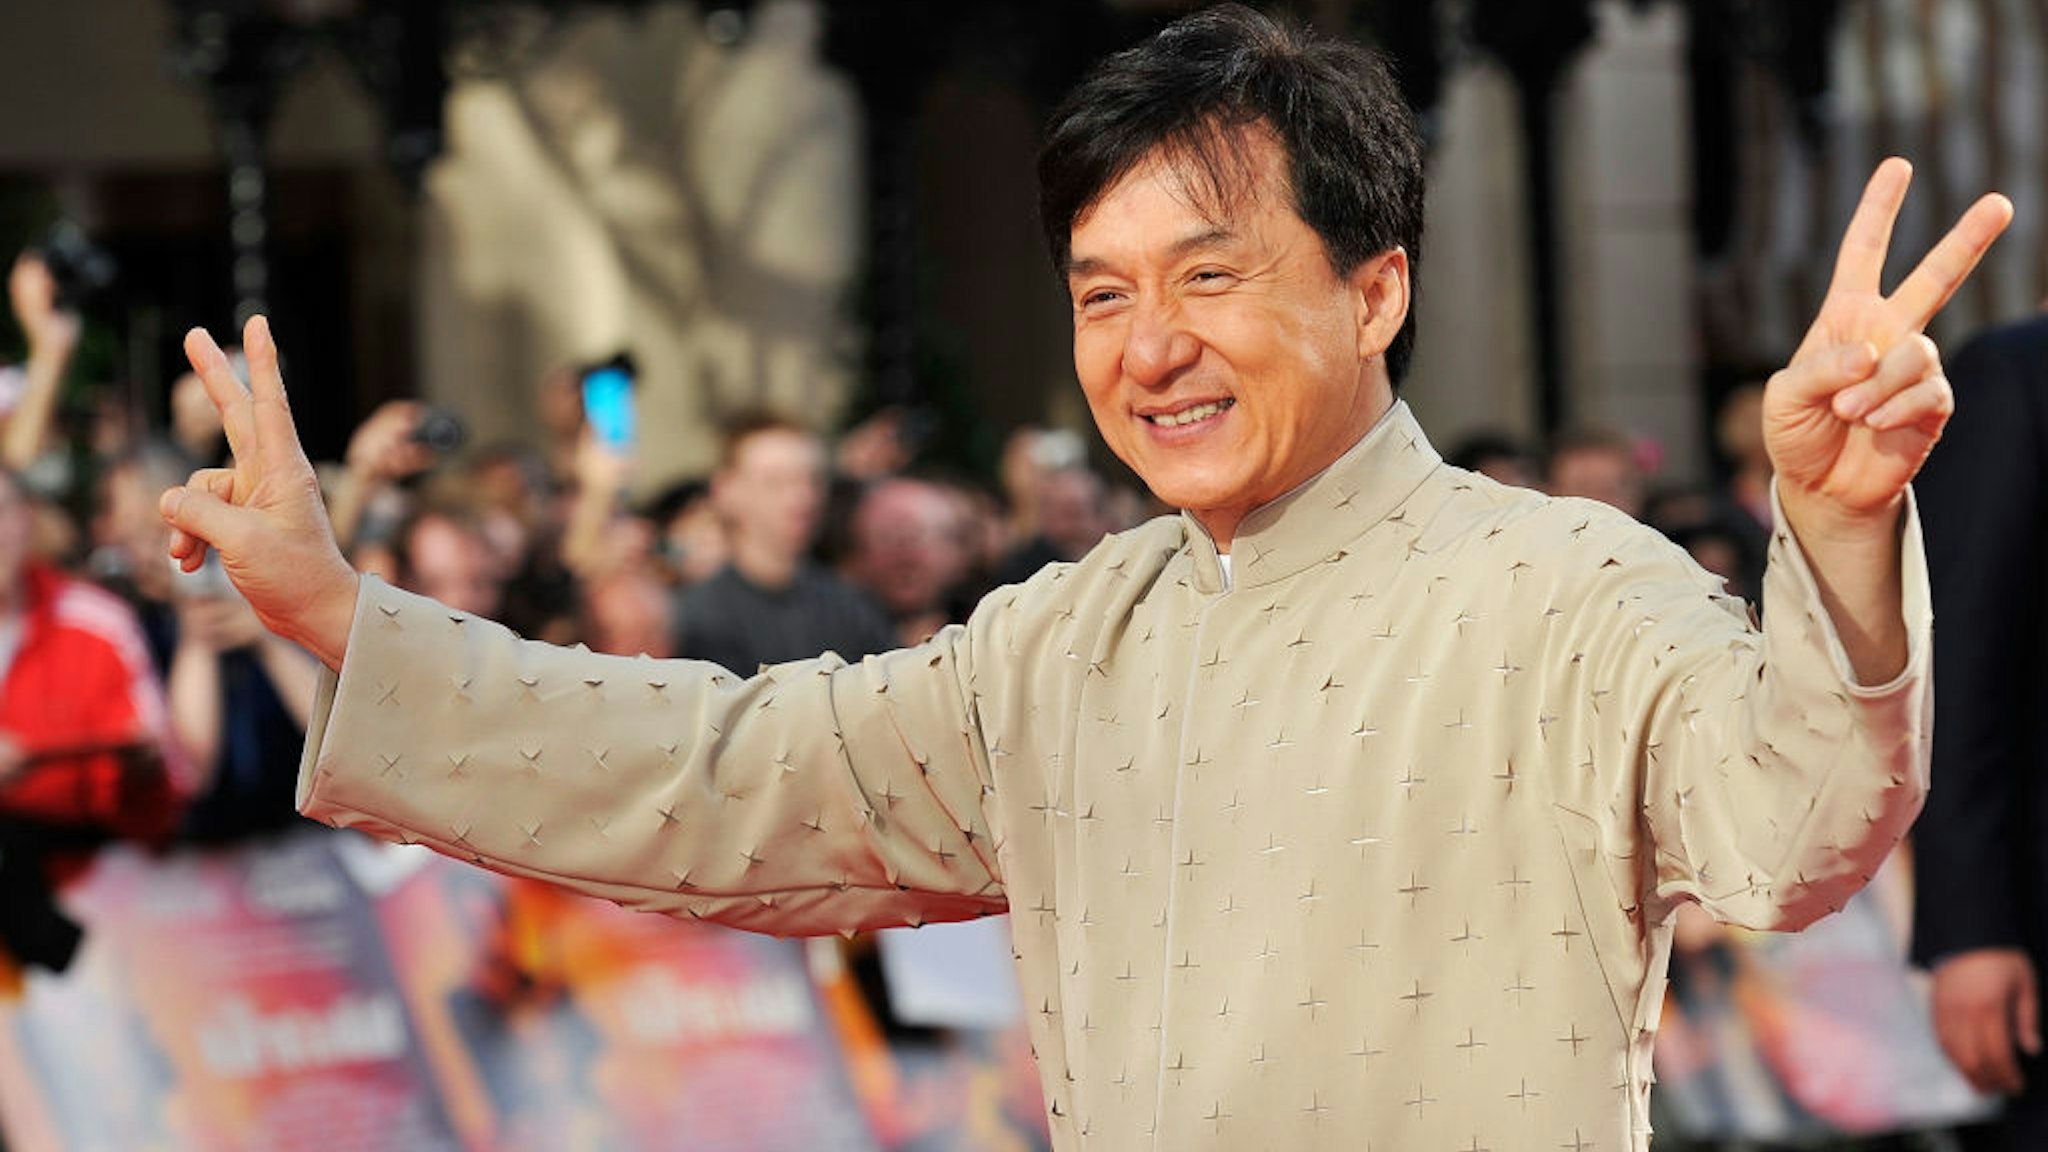 LONDON, ENGLAND - JULY 15: Jackie Chan attends the UK Film Premiere of The Karate Kid at Odeon Leicester Square on July 15, 2010 in London, England. (Photo by Gareth Cattermole/Getty Images)